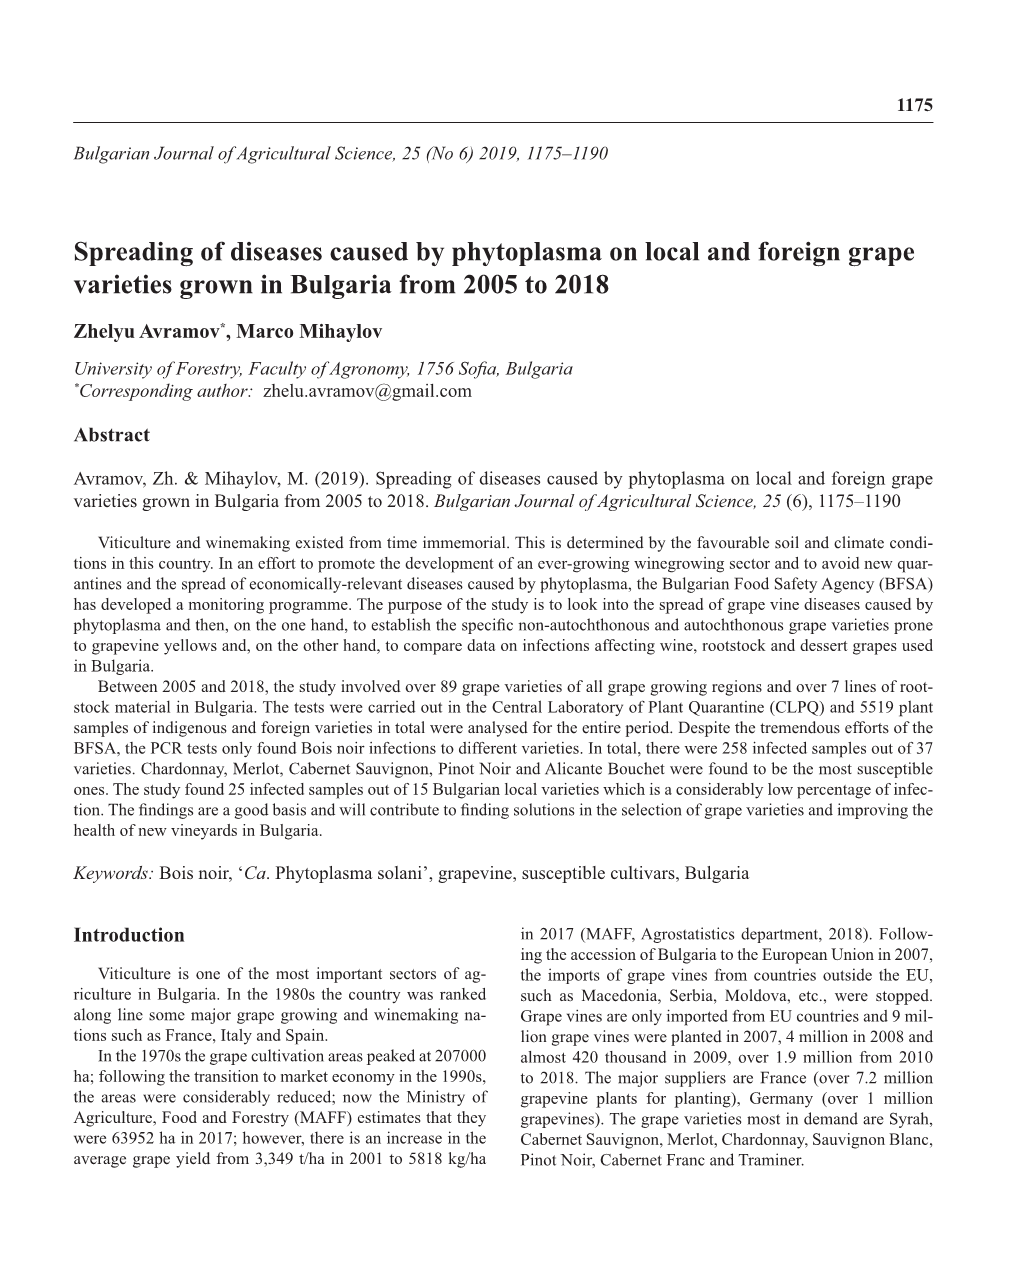 Spreading of Diseases Caused by Phytoplasma on Local and Foreign Grape Varieties Grown in Bulgaria from 2005 to 2018